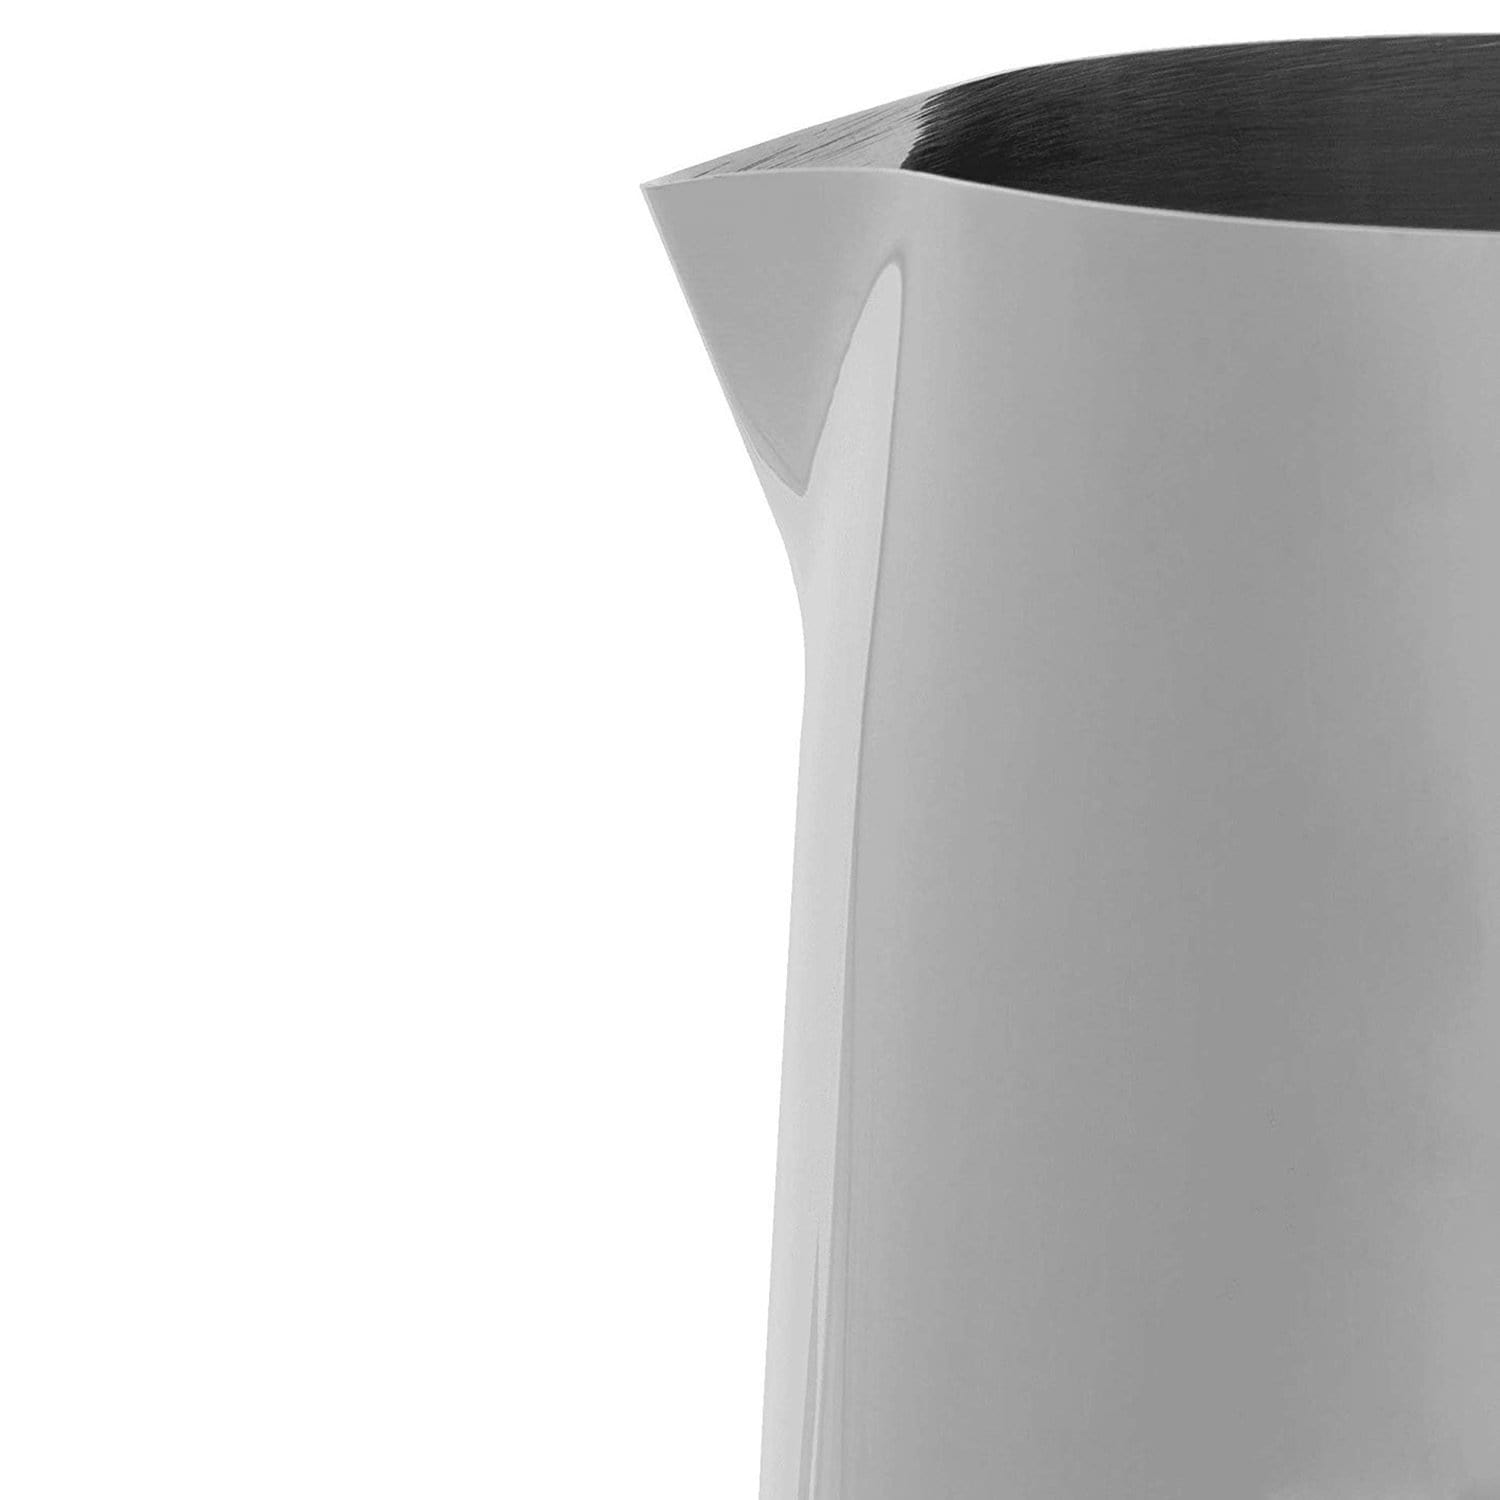 Bialetti Milk Pitcher - White and Silver, 30 Litre - 1806 - Jashanmal Home